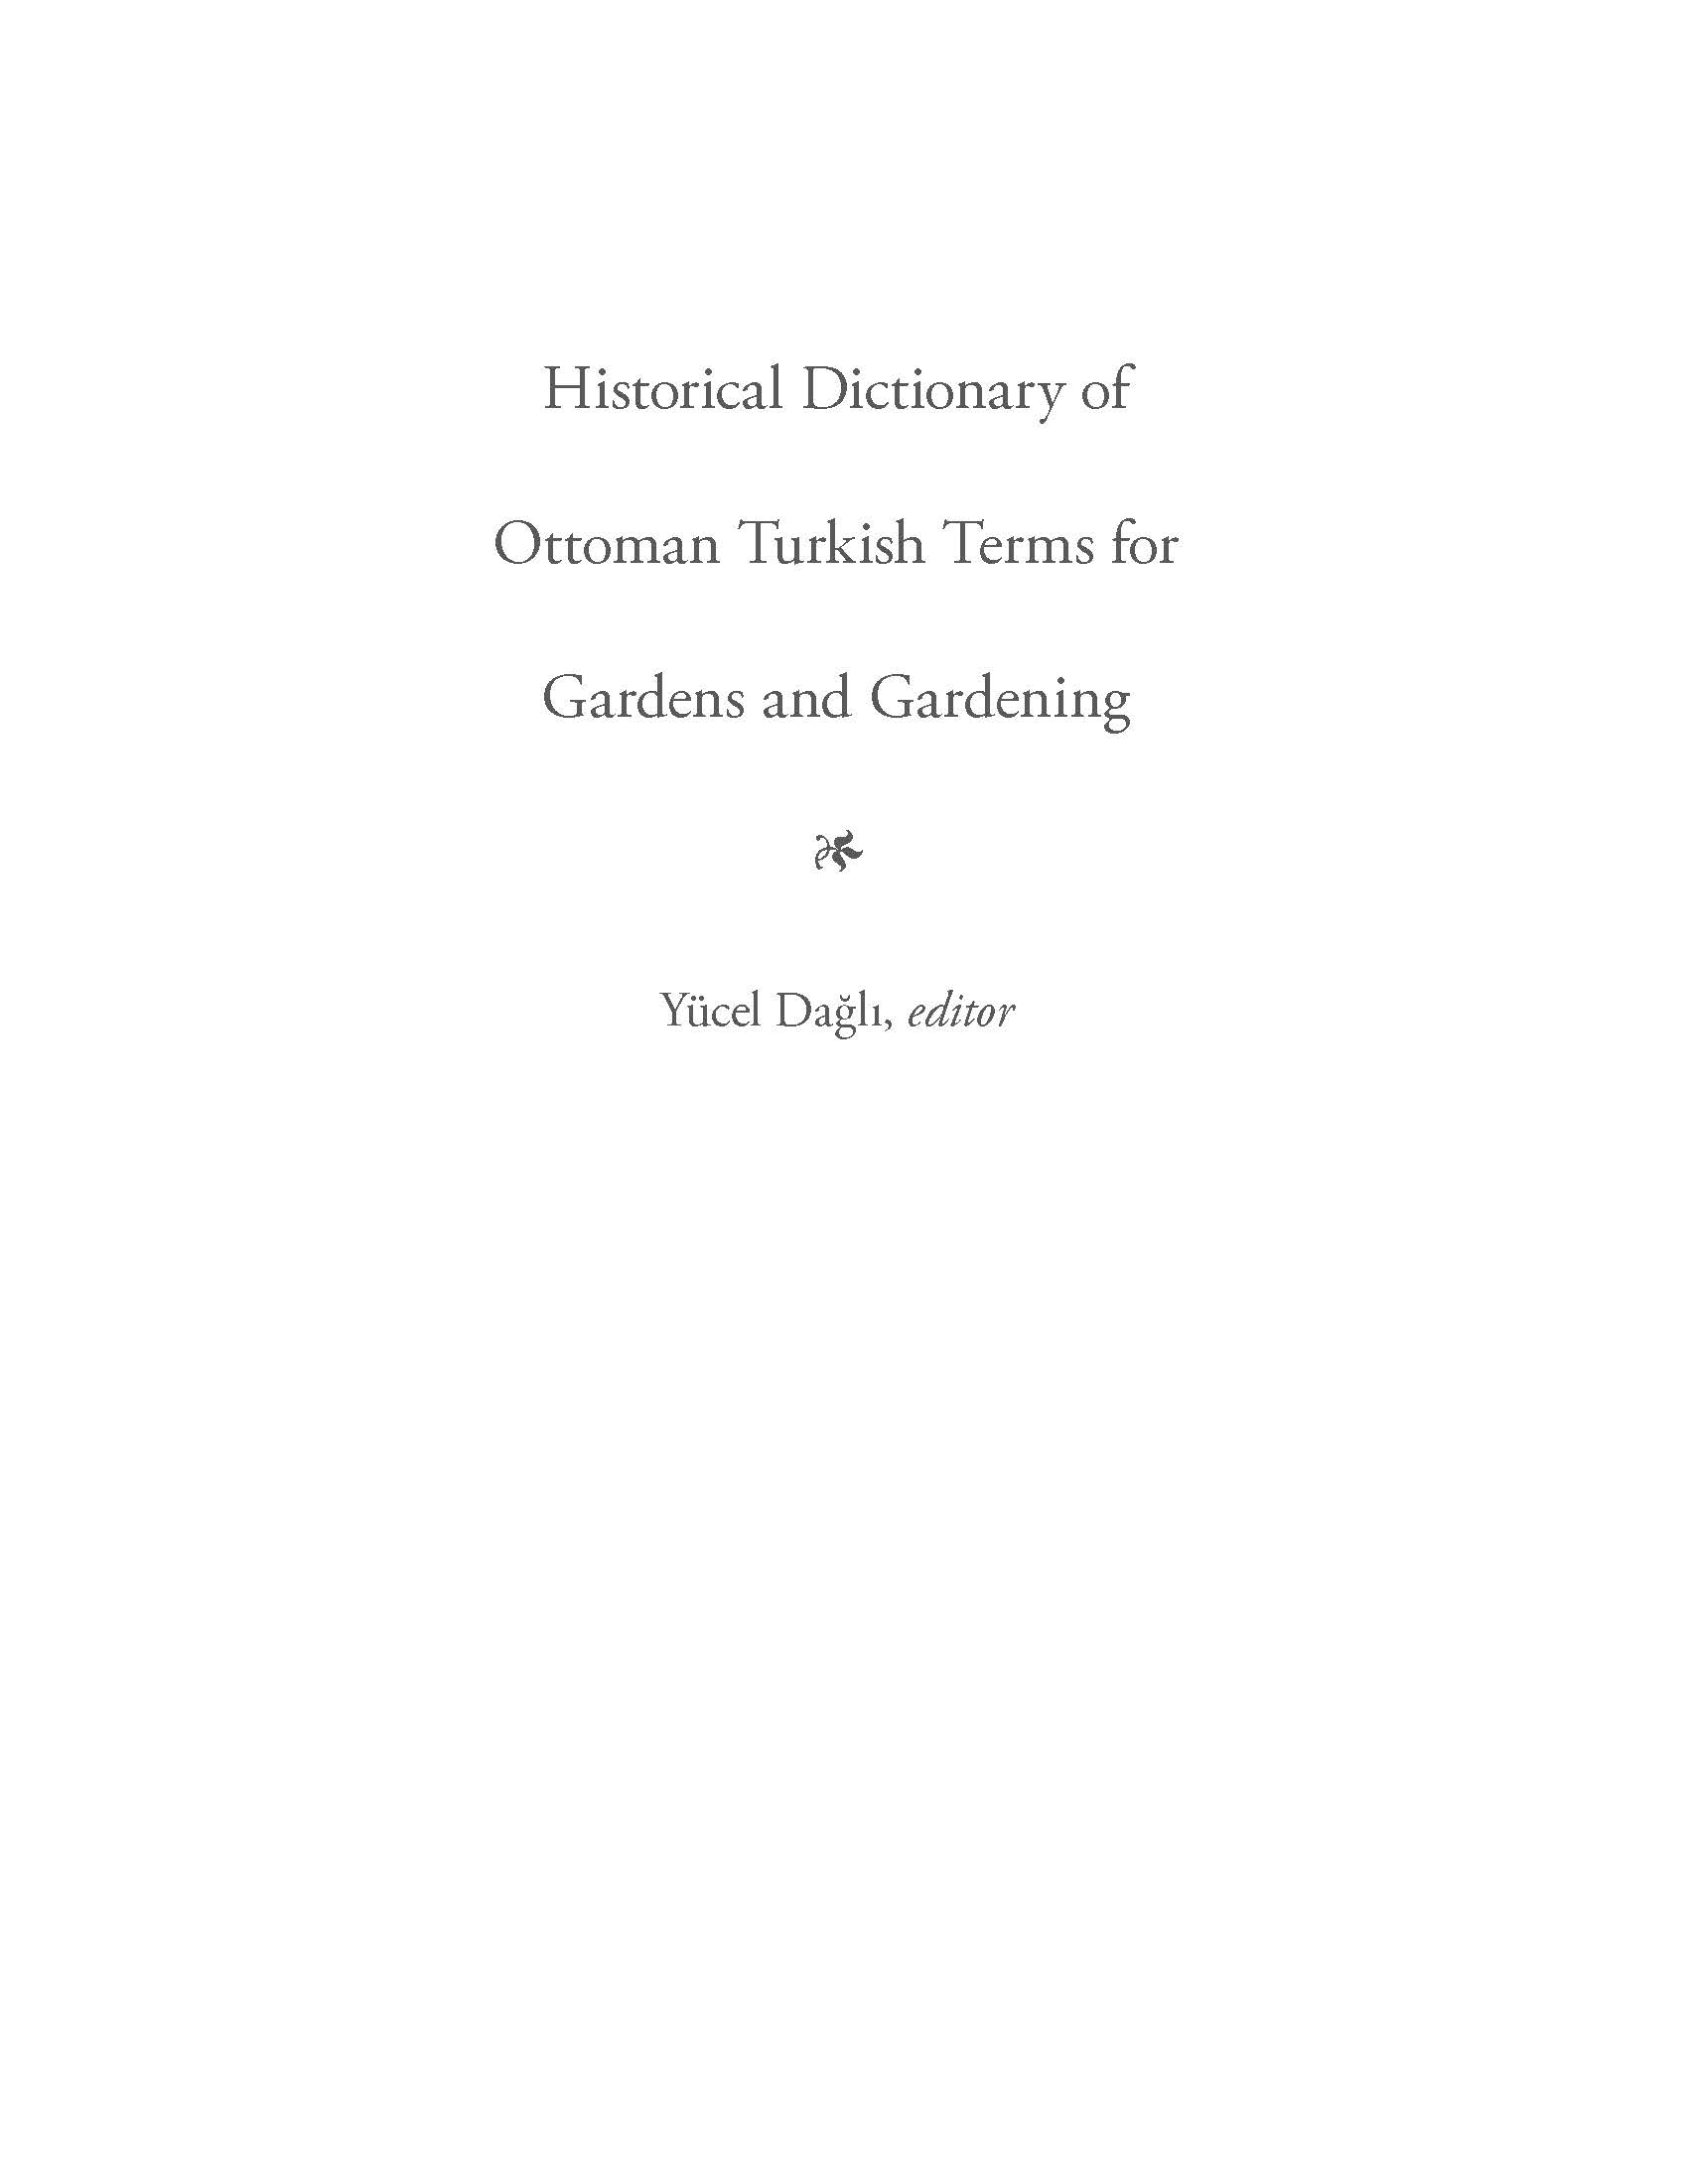 Historical Dictionary of Ottoman Turkish Terms for Gardens and Gardening